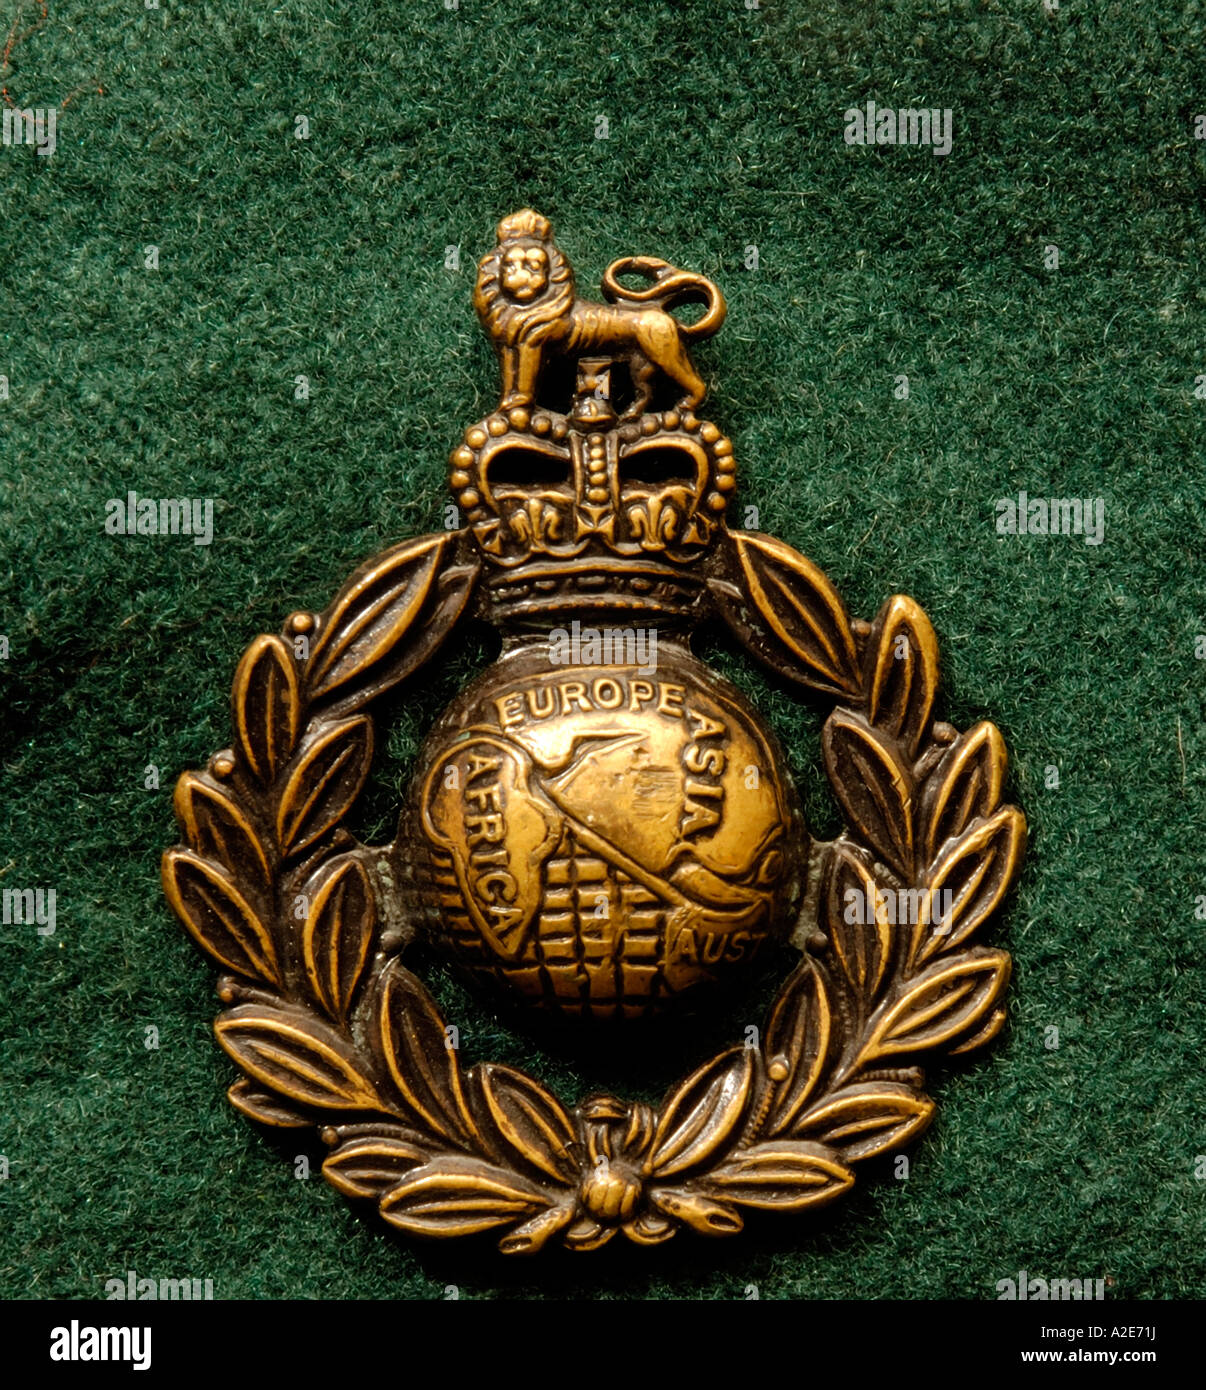 Military Cap Badge High Resolution Stock Photography and Images - Alamy